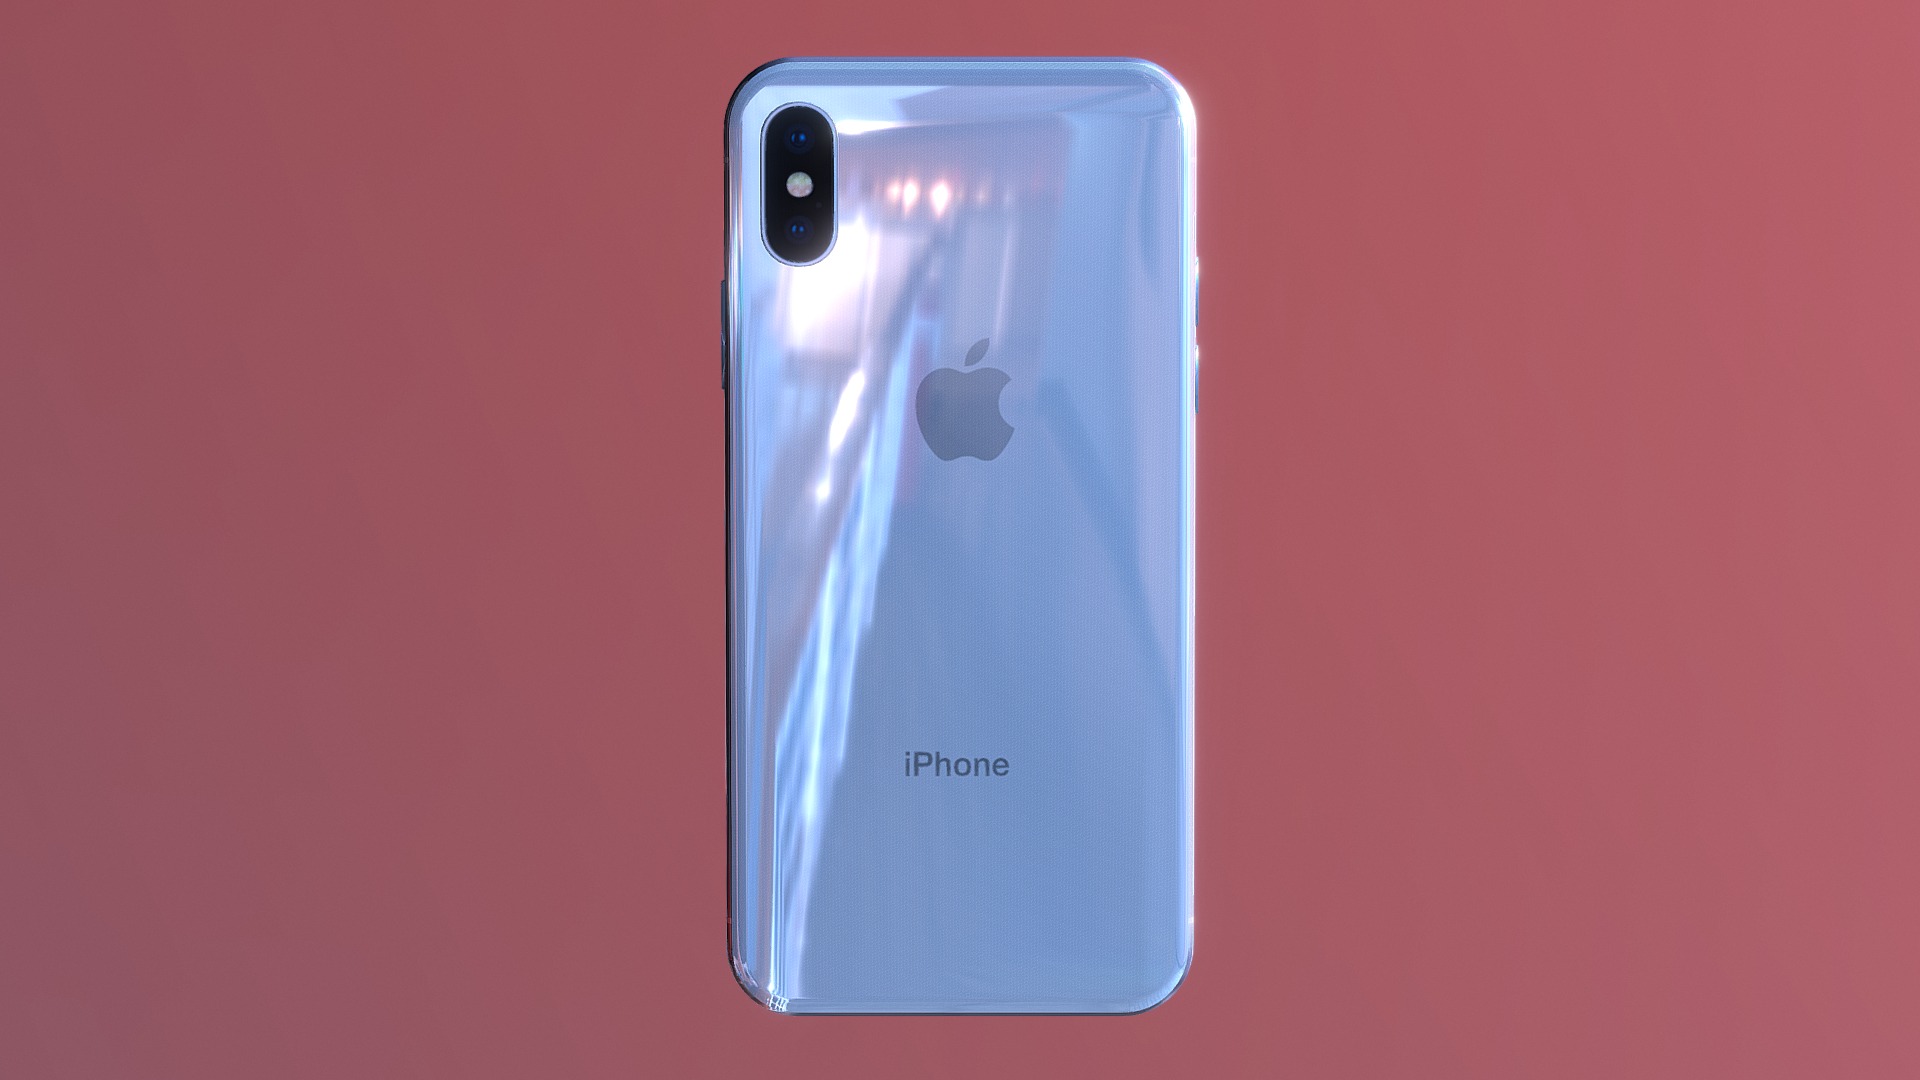 3D model iPhone X - This is a 3D model of the iPhone X. The 3D model is about a cell phone on a pink background.